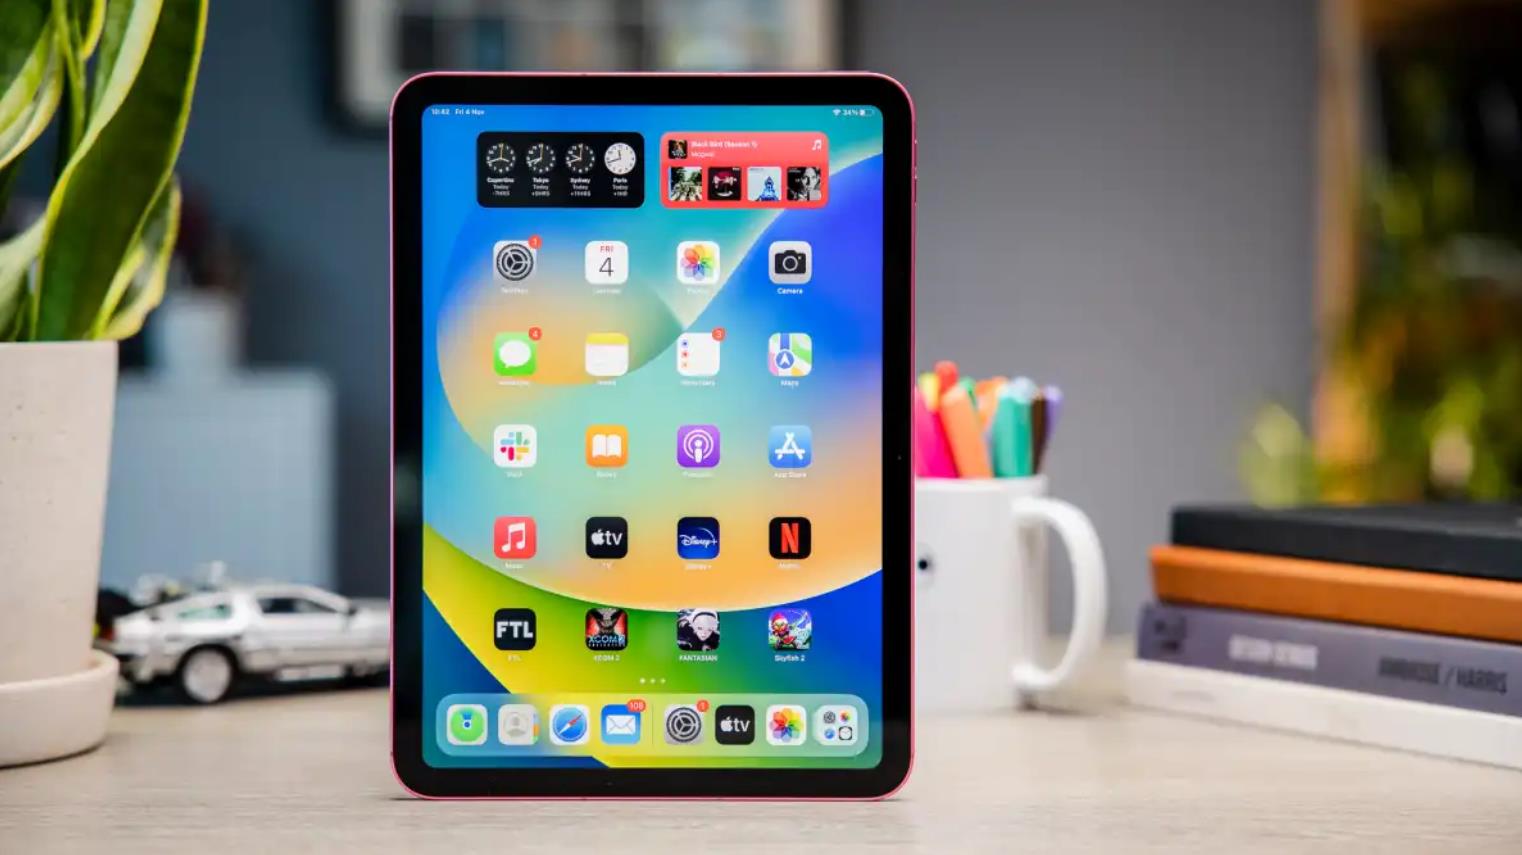 10 Hidden Features of the iPad 10th Generation That You Might Not Know  About - ESR Blog